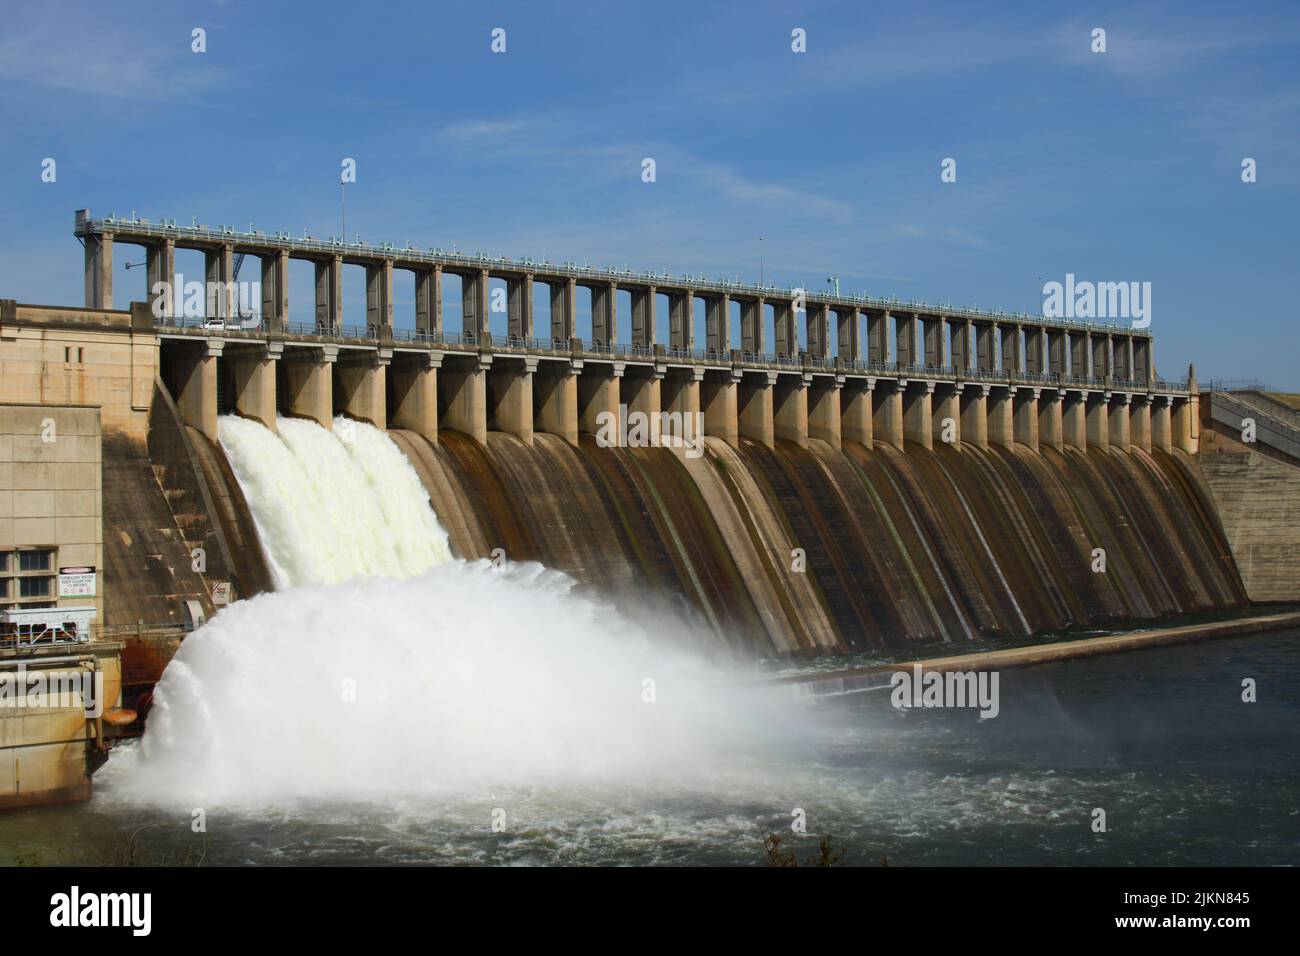 The Bratsk hydroelectric power station with water coming out of the columns Stock Photo